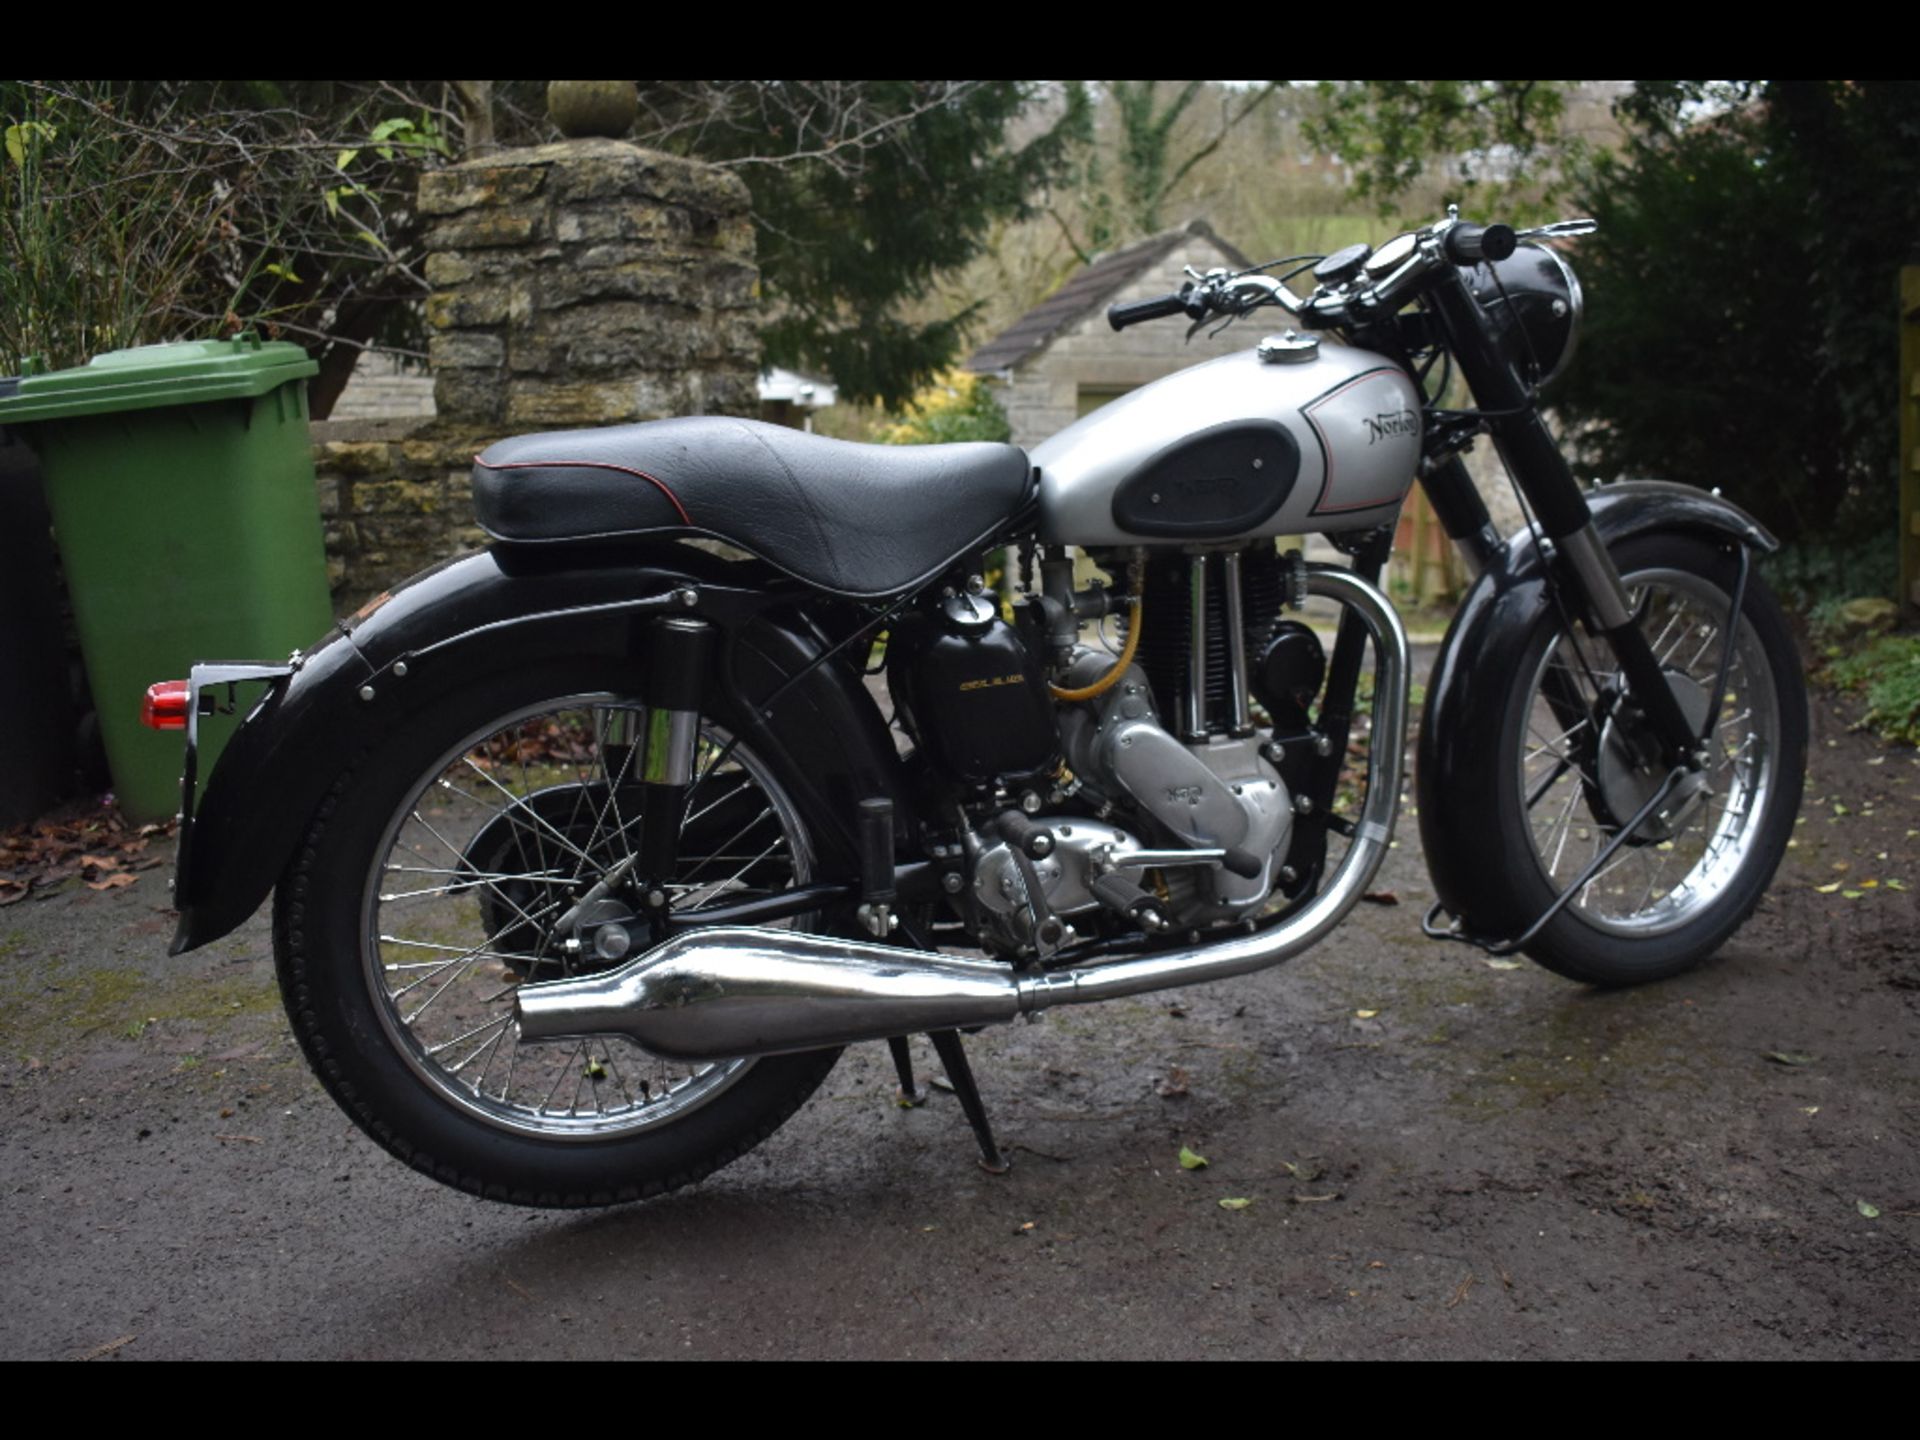 A 1954 Norton ES2, registration number PGF 807, engine number 52901 79X100 J4. From a private